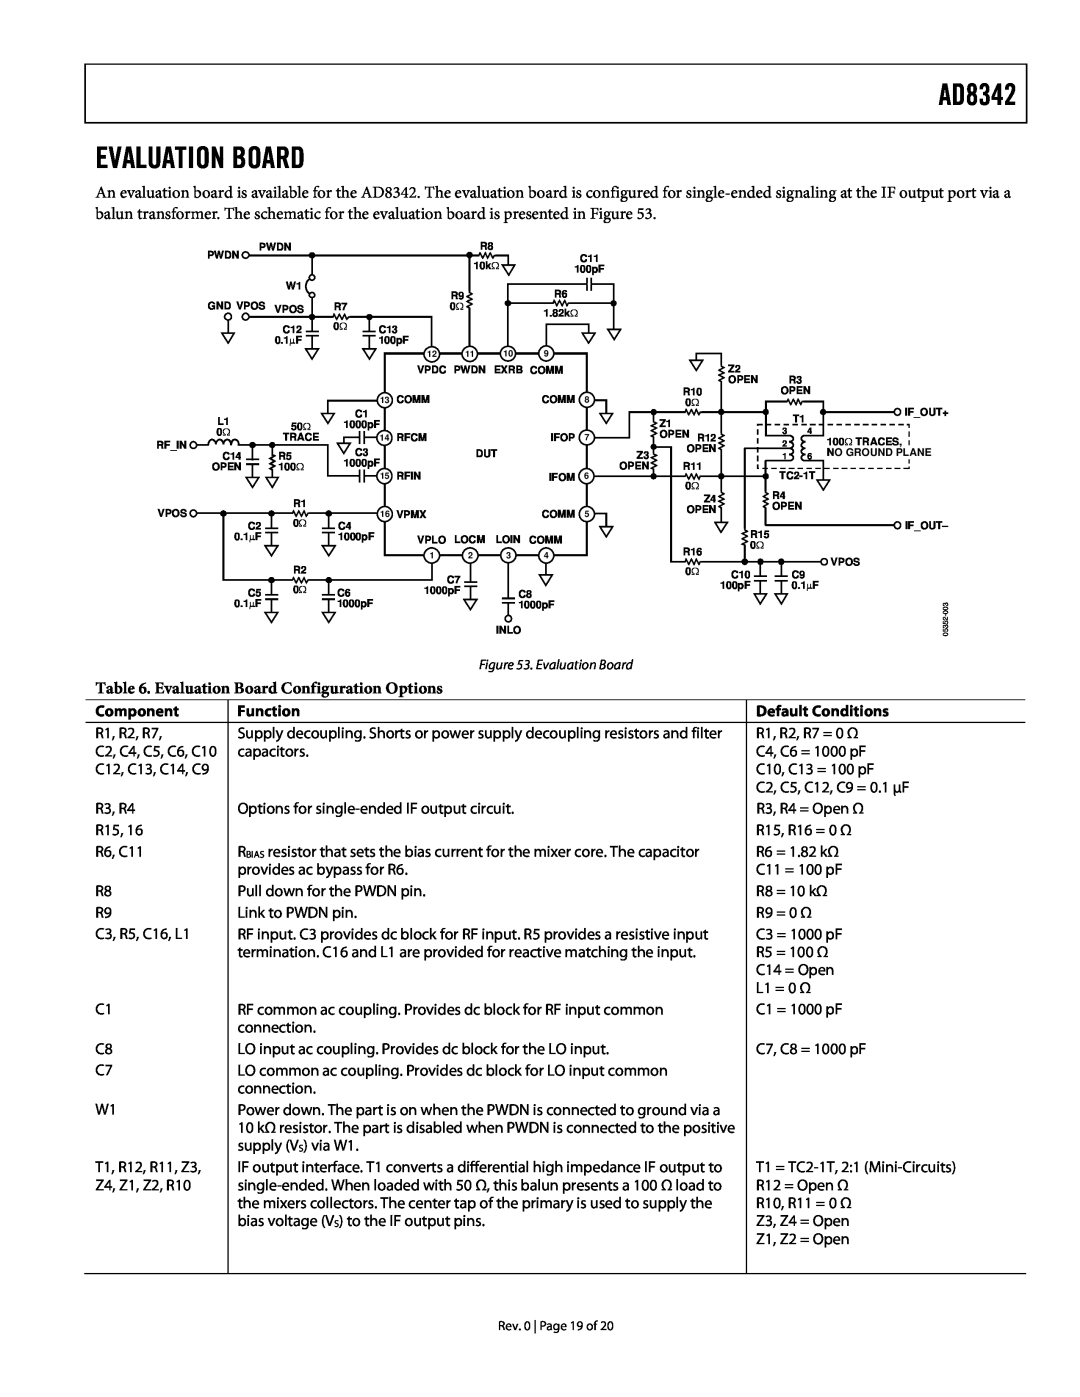 Analog Devices specifications AD8342 EVALUATION BOARD, Evaluation Board Configuration Options 